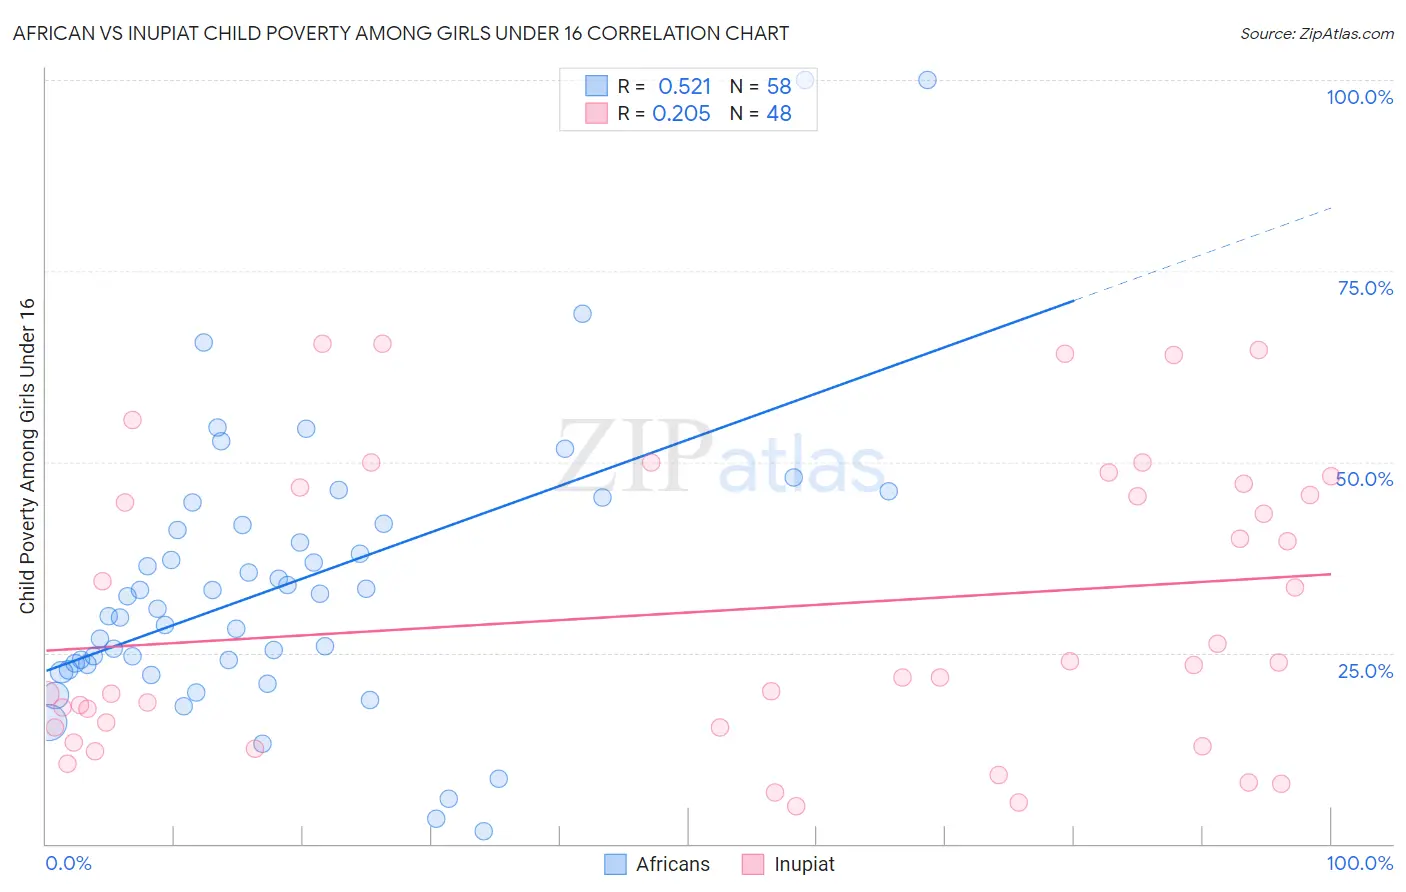 African vs Inupiat Child Poverty Among Girls Under 16